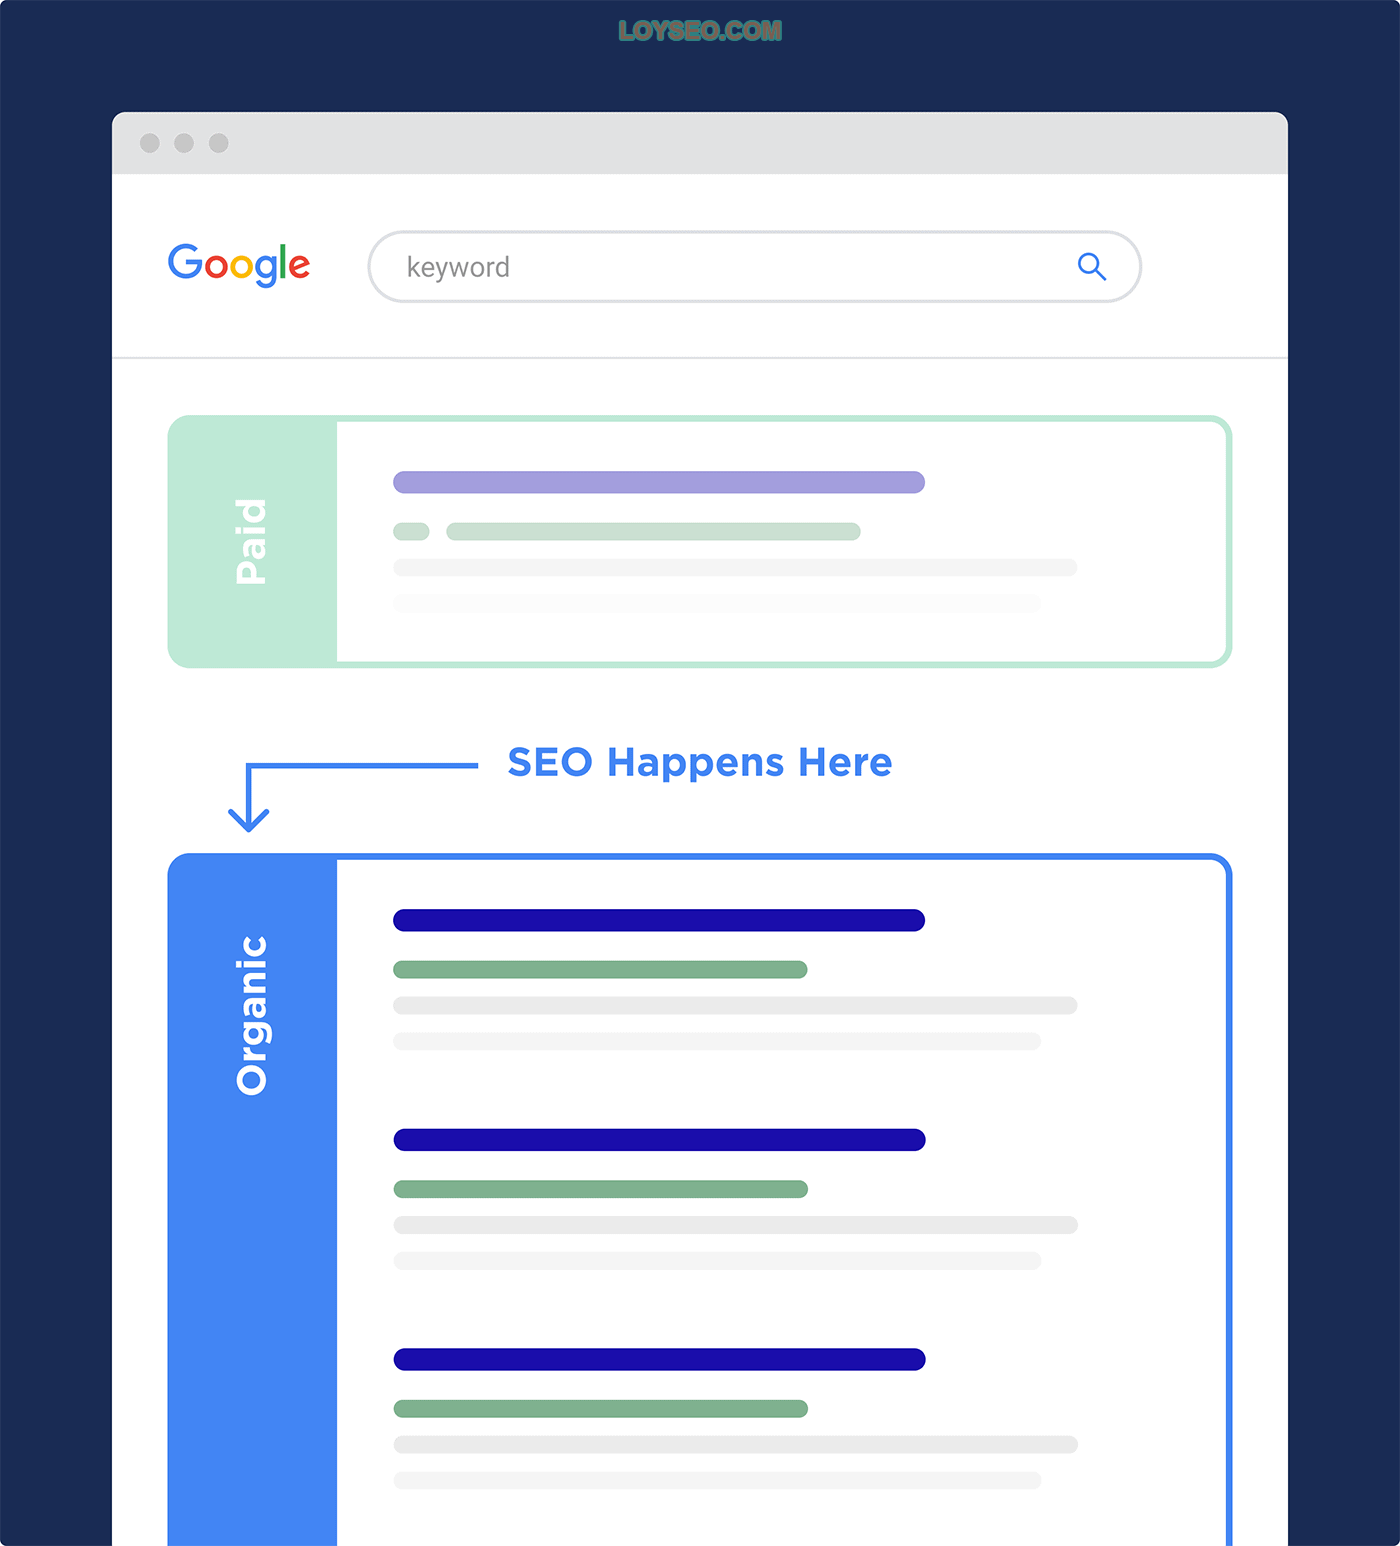 SEO is about improving a site's organic ranking